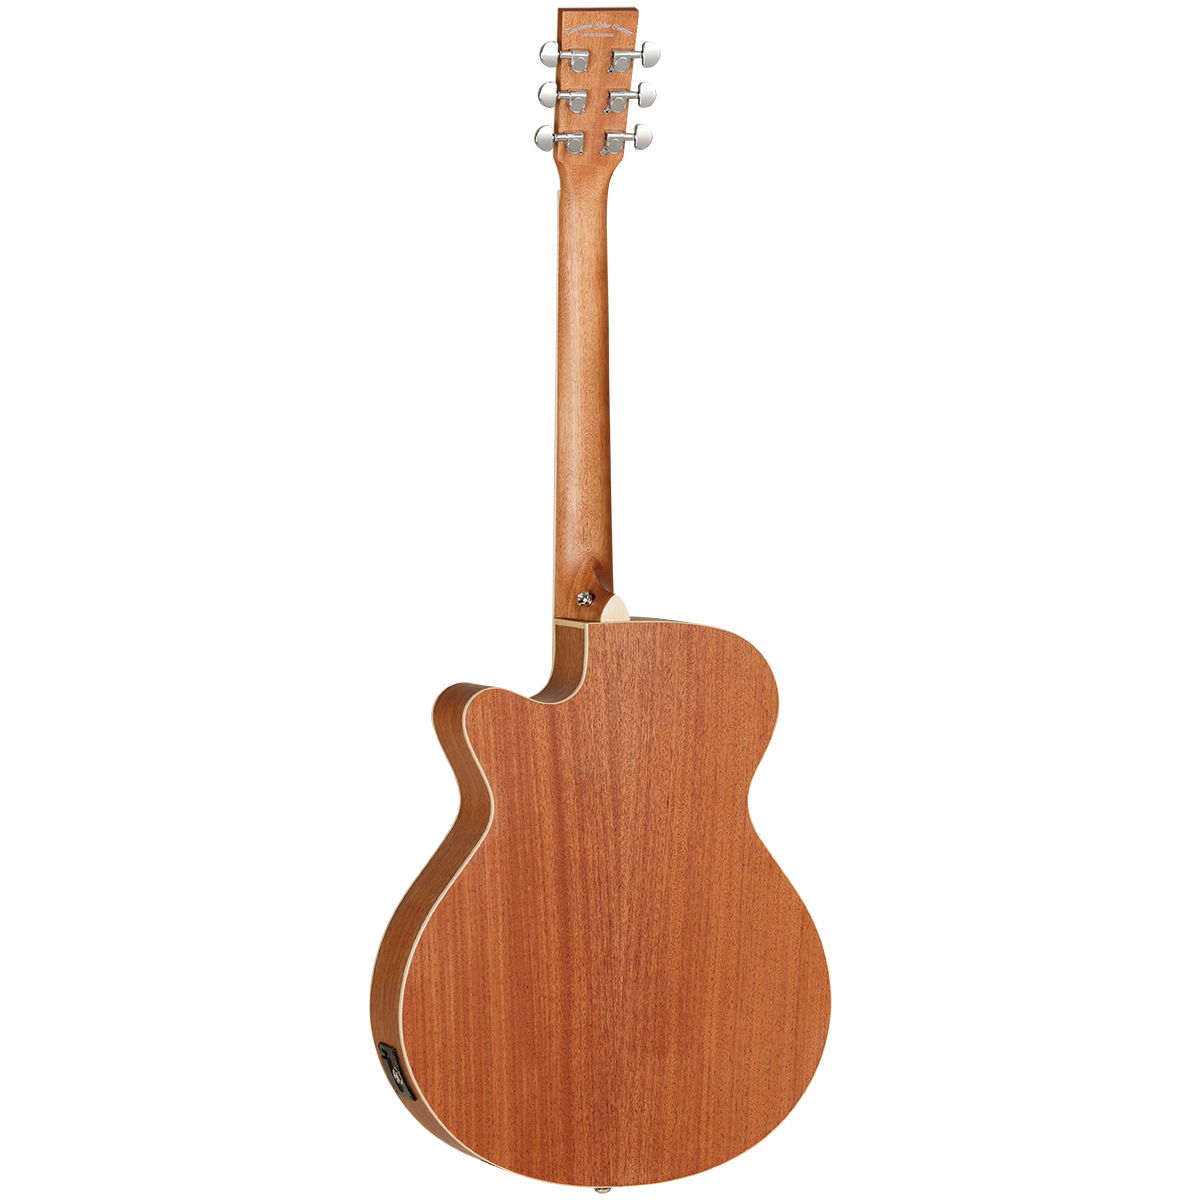 Tanglewood Union Series Superfolk Acoustic Electric Guitar (Mahogany)